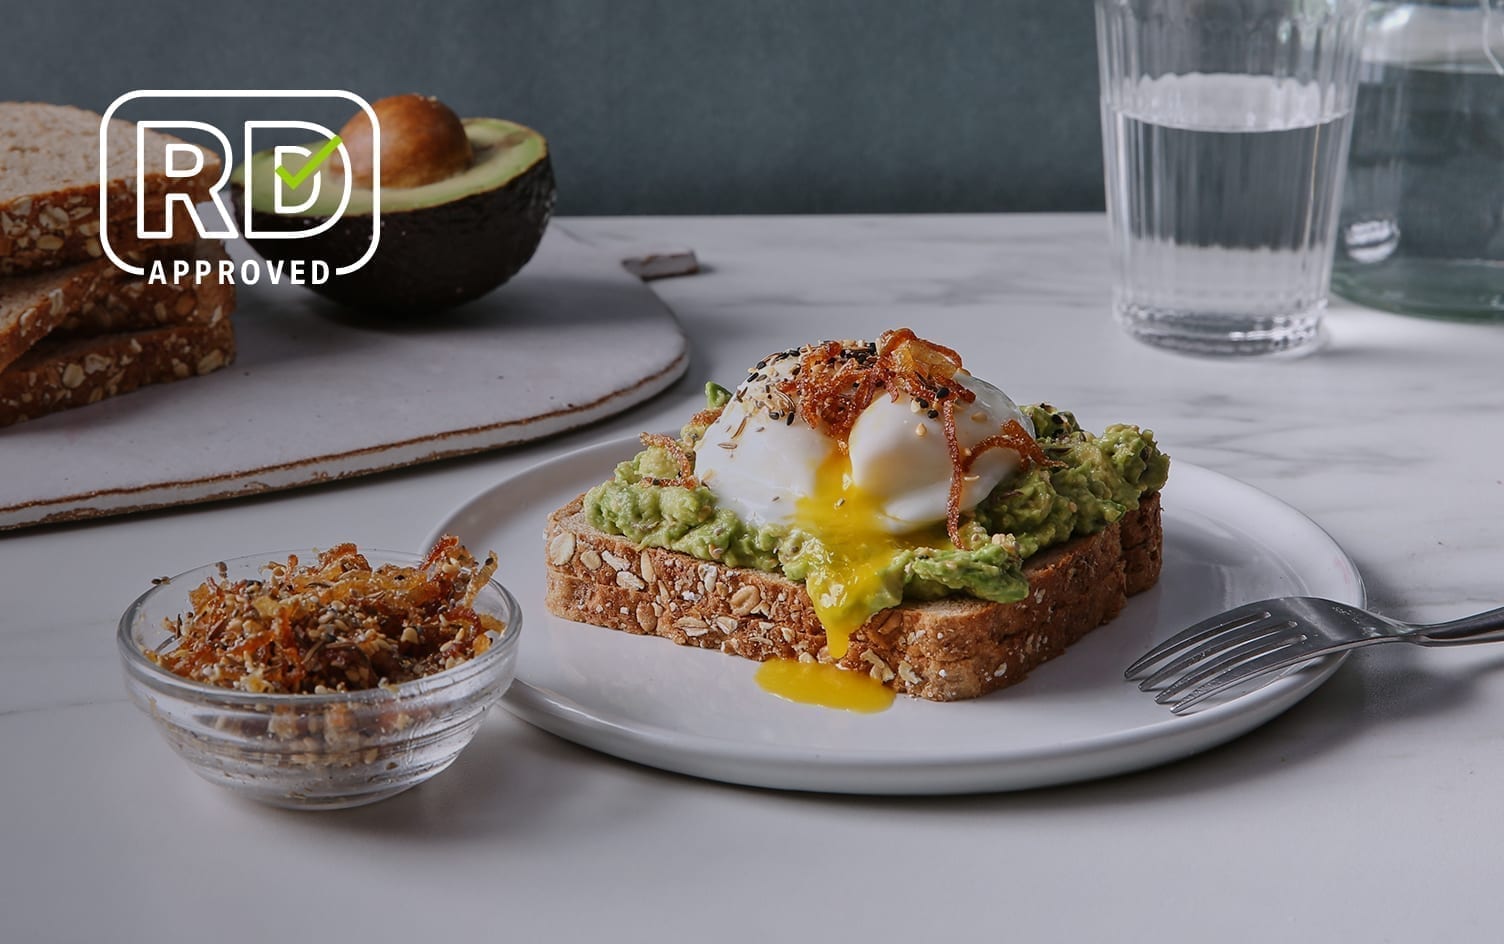 Quick, Microwave-Poached Eggs on Avocado Toast